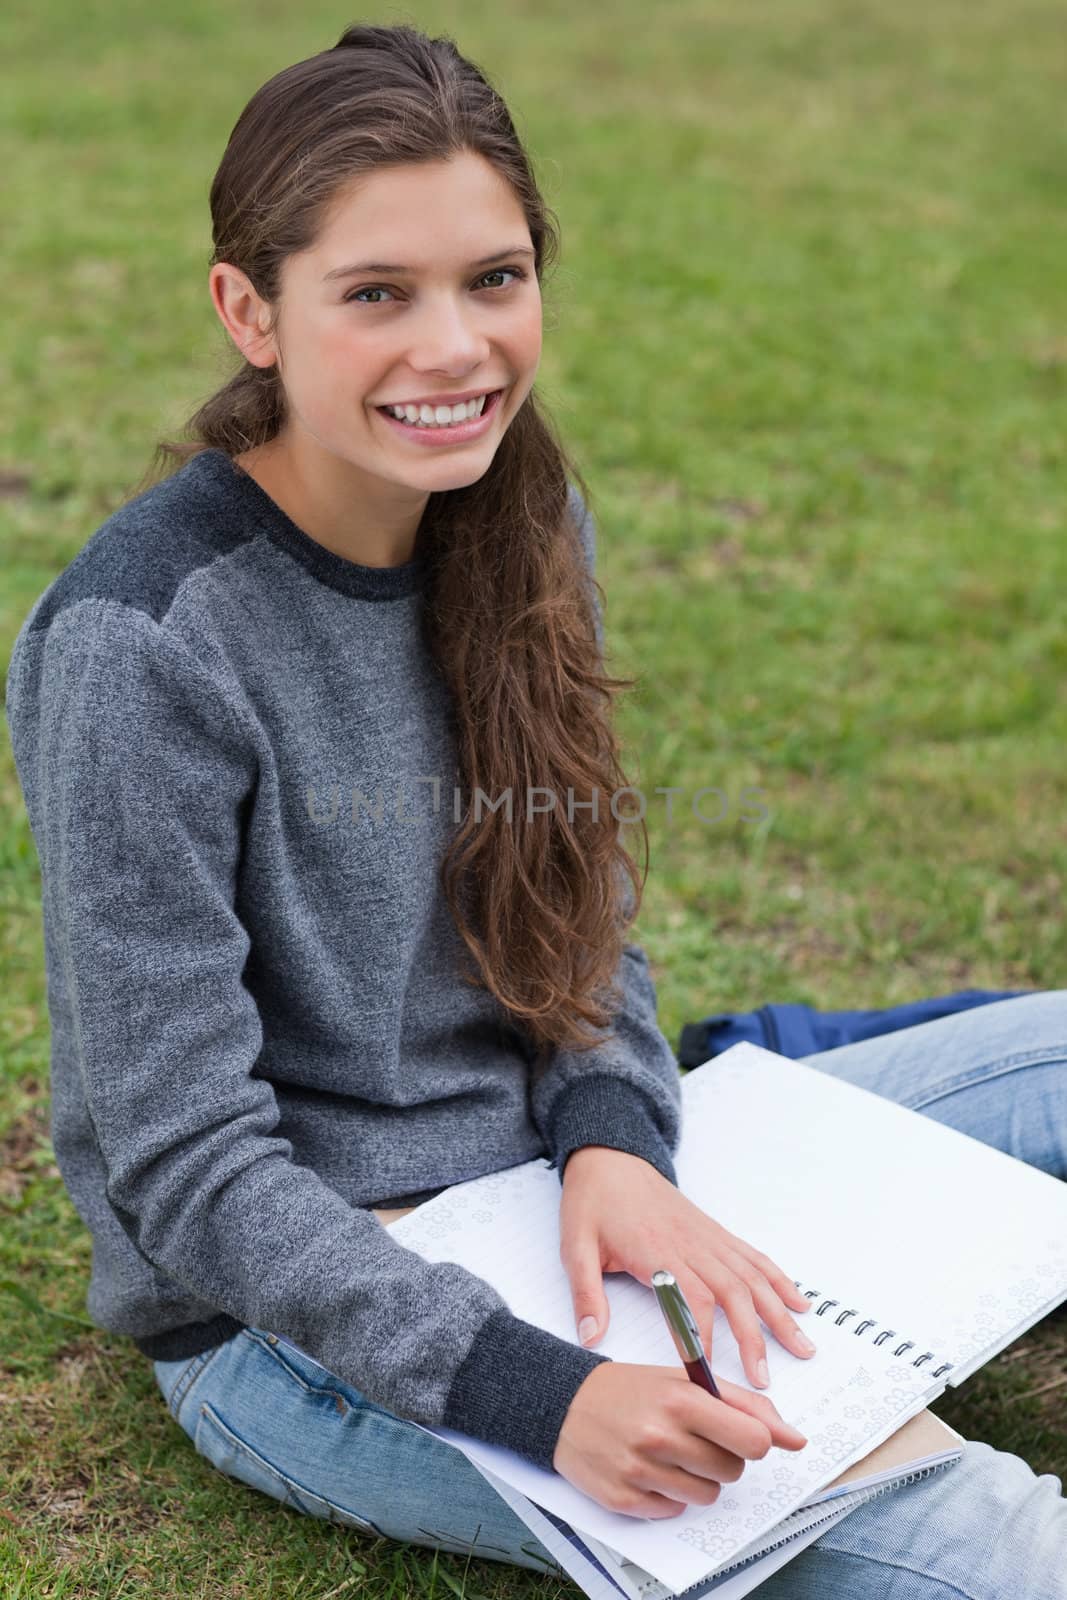 Smiling young woman writing on her notebook while sitting on the grass